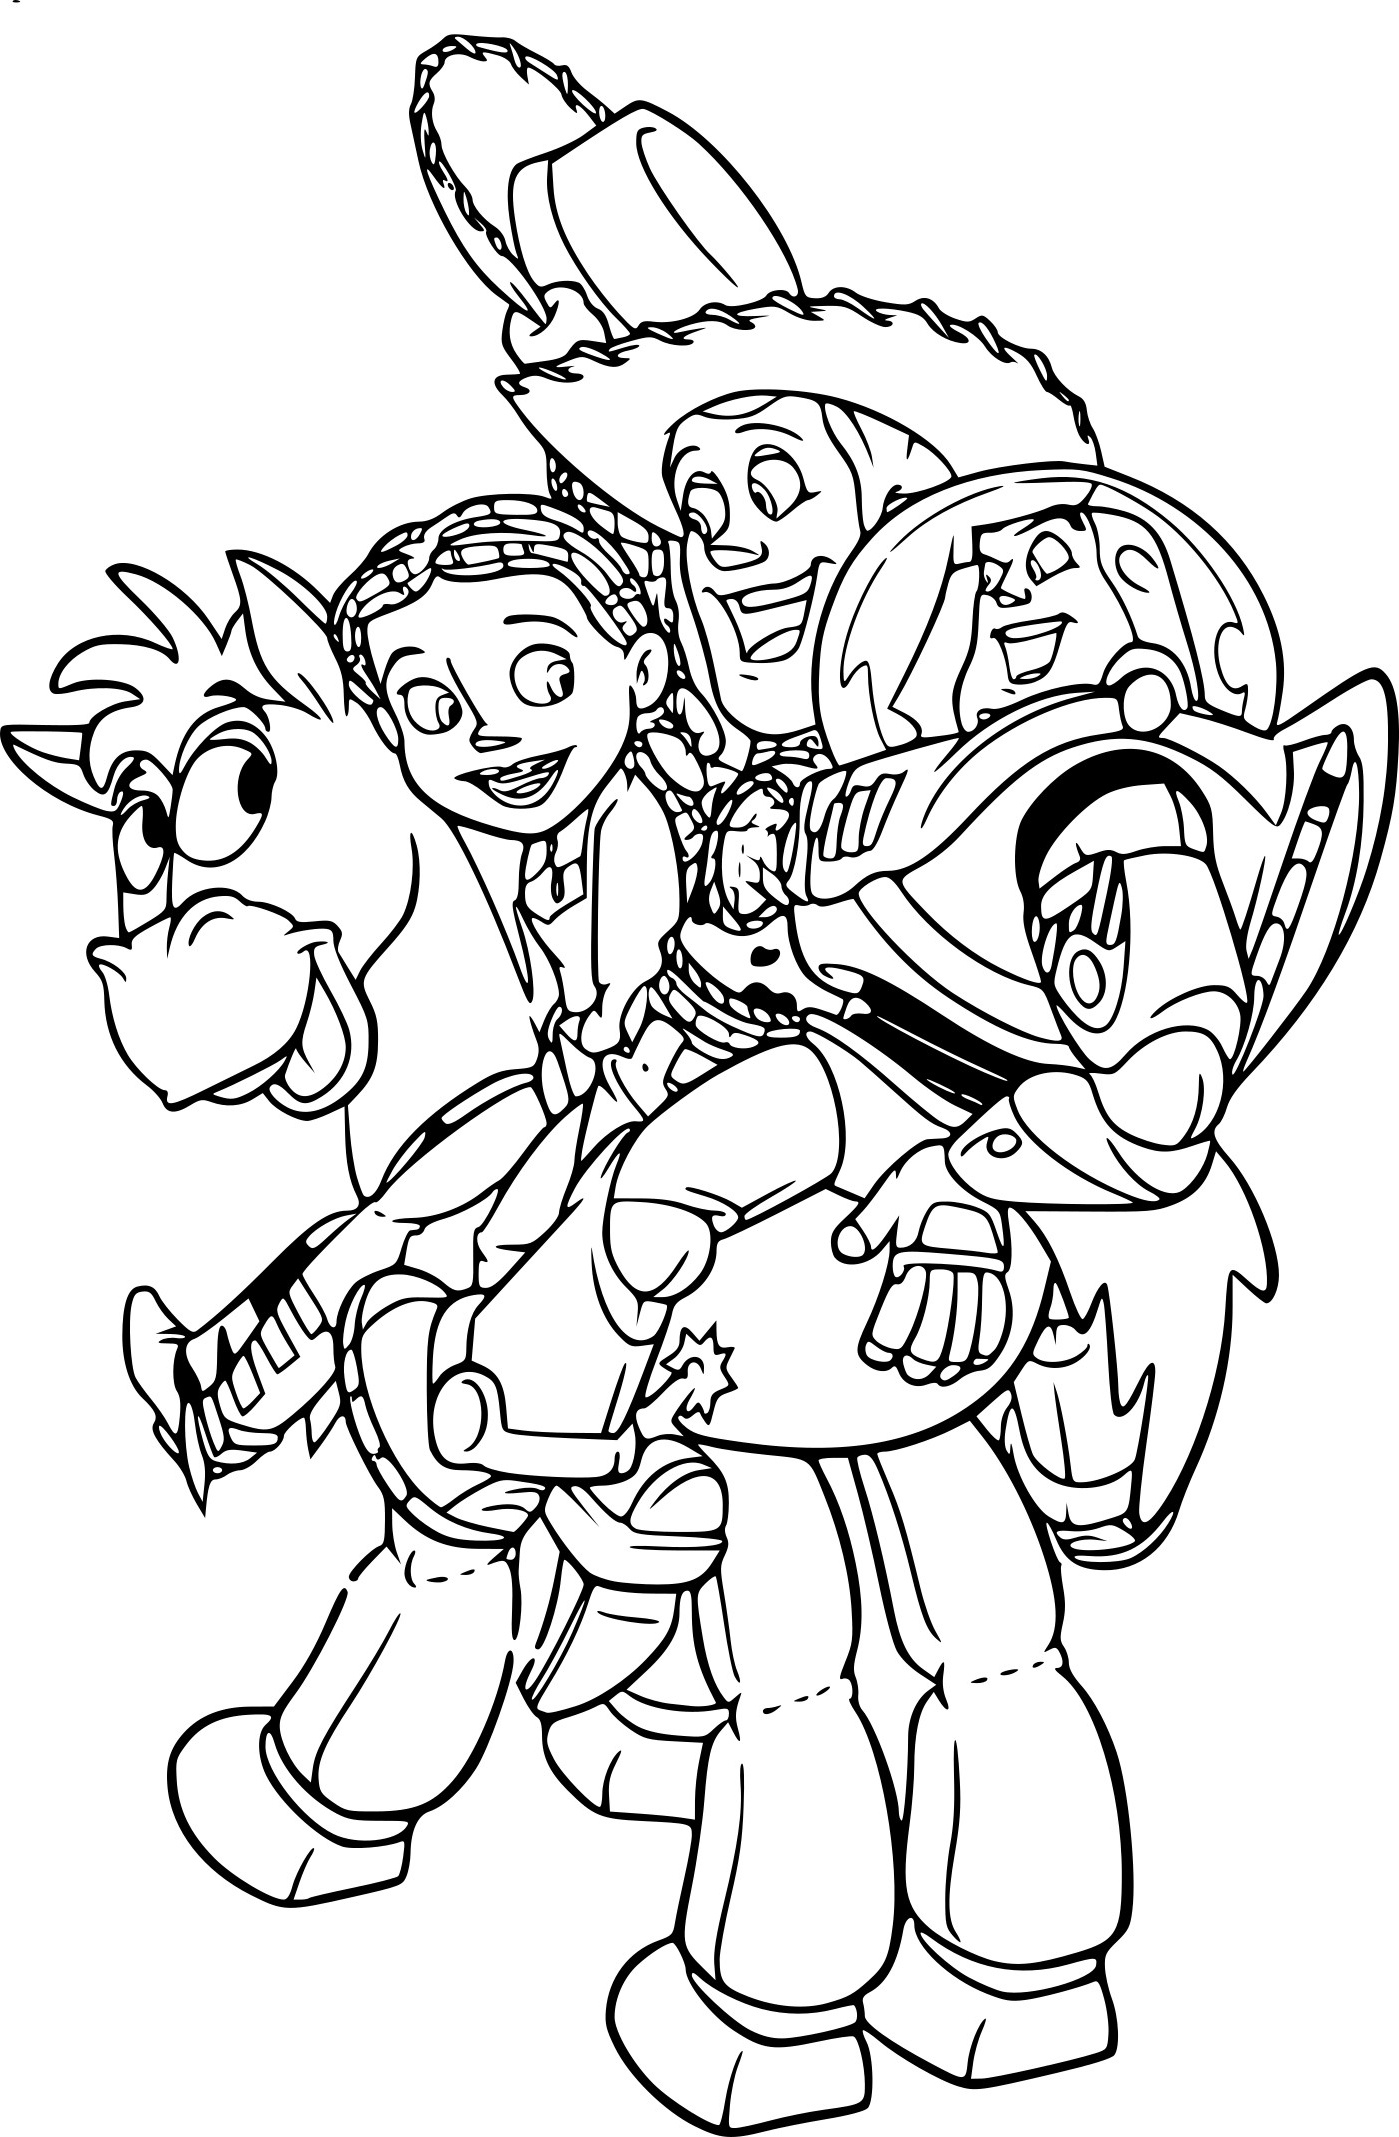 Dessin toy Story Beau Collection Coloriage toy Story à Imprimer